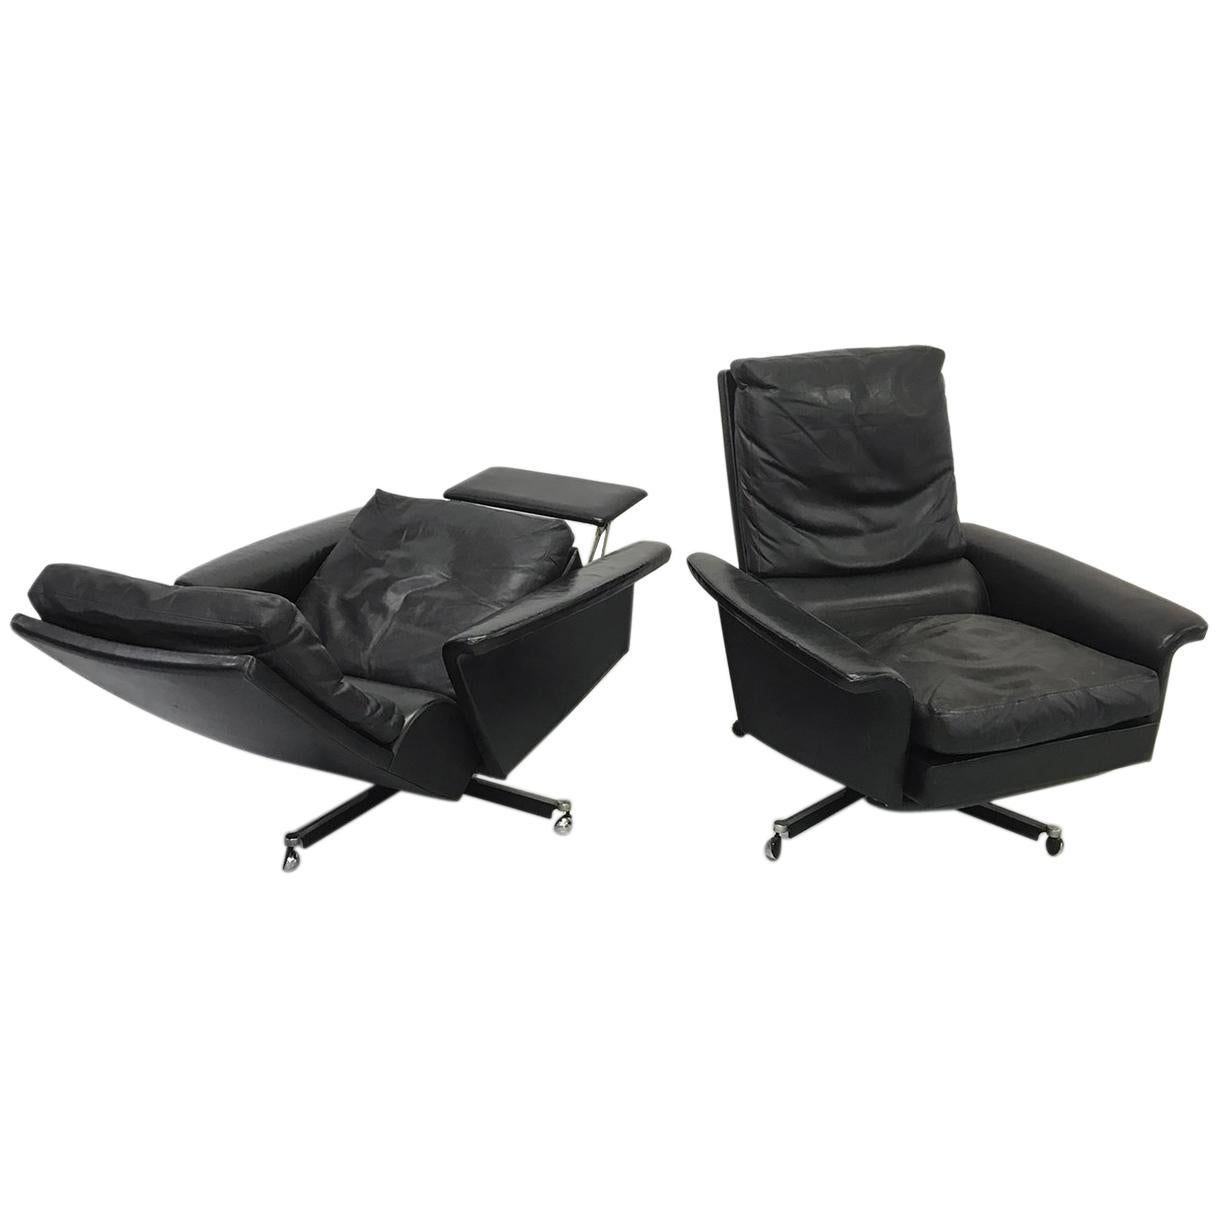 Pair of 1960s Mid-Century Modern Black Leather Reclining Lay-Z-Boy Lounge Chairs